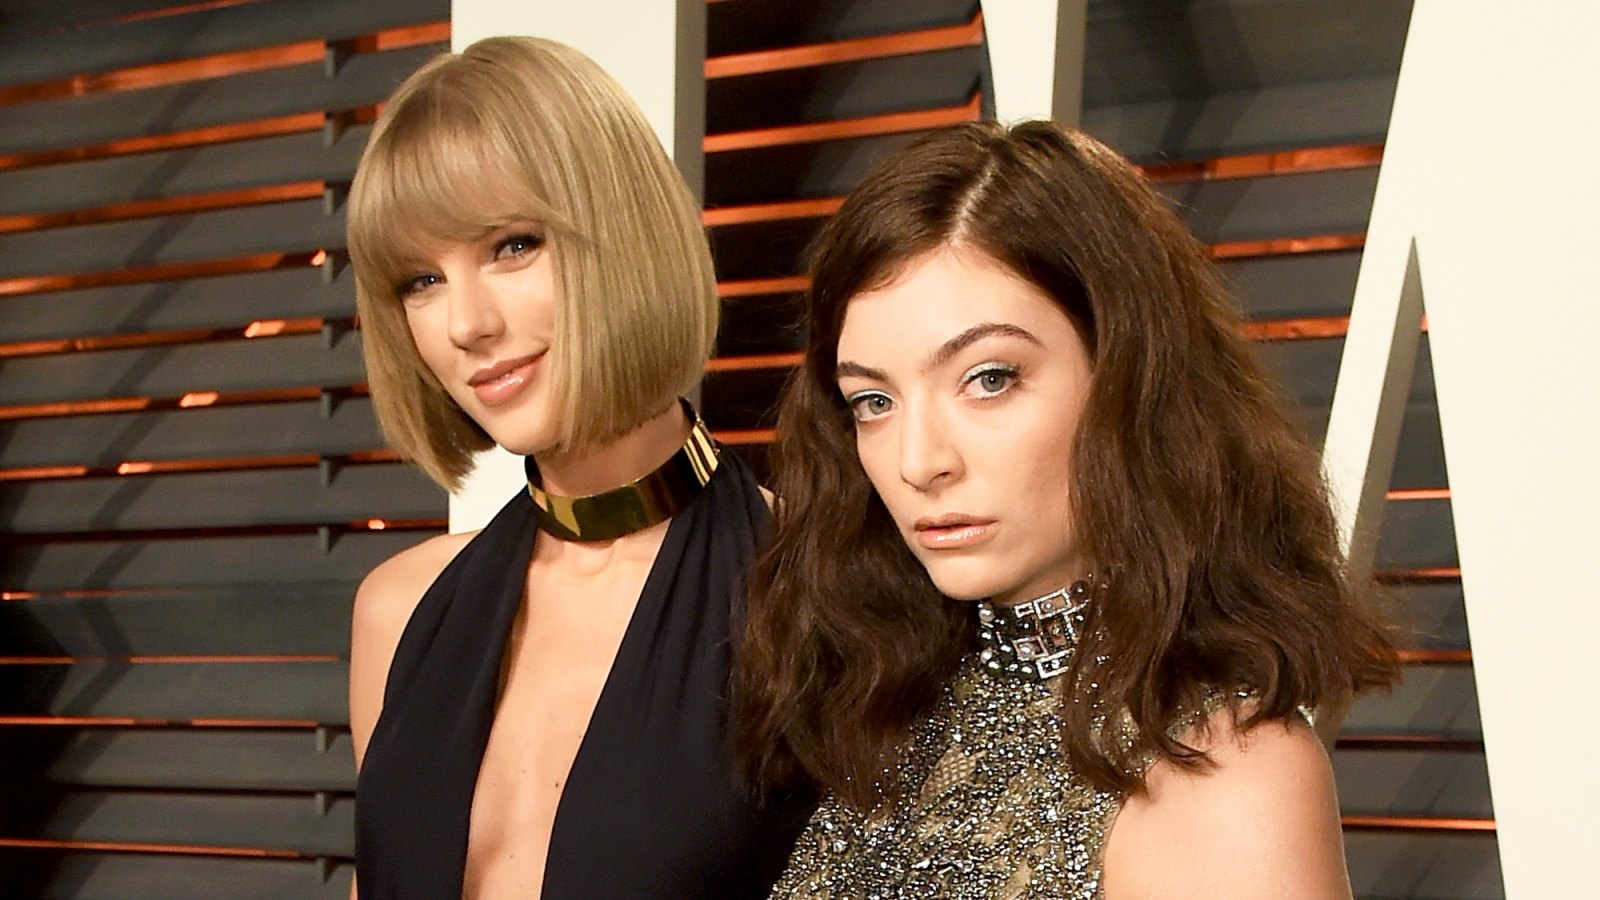 Taylor Swift and Lorde attend the 2016 Vanity Fair Oscar Party Hosted By Graydon Carter at the Wallis Annenberg Center for the Performing Arts in Beverly Hills, California.